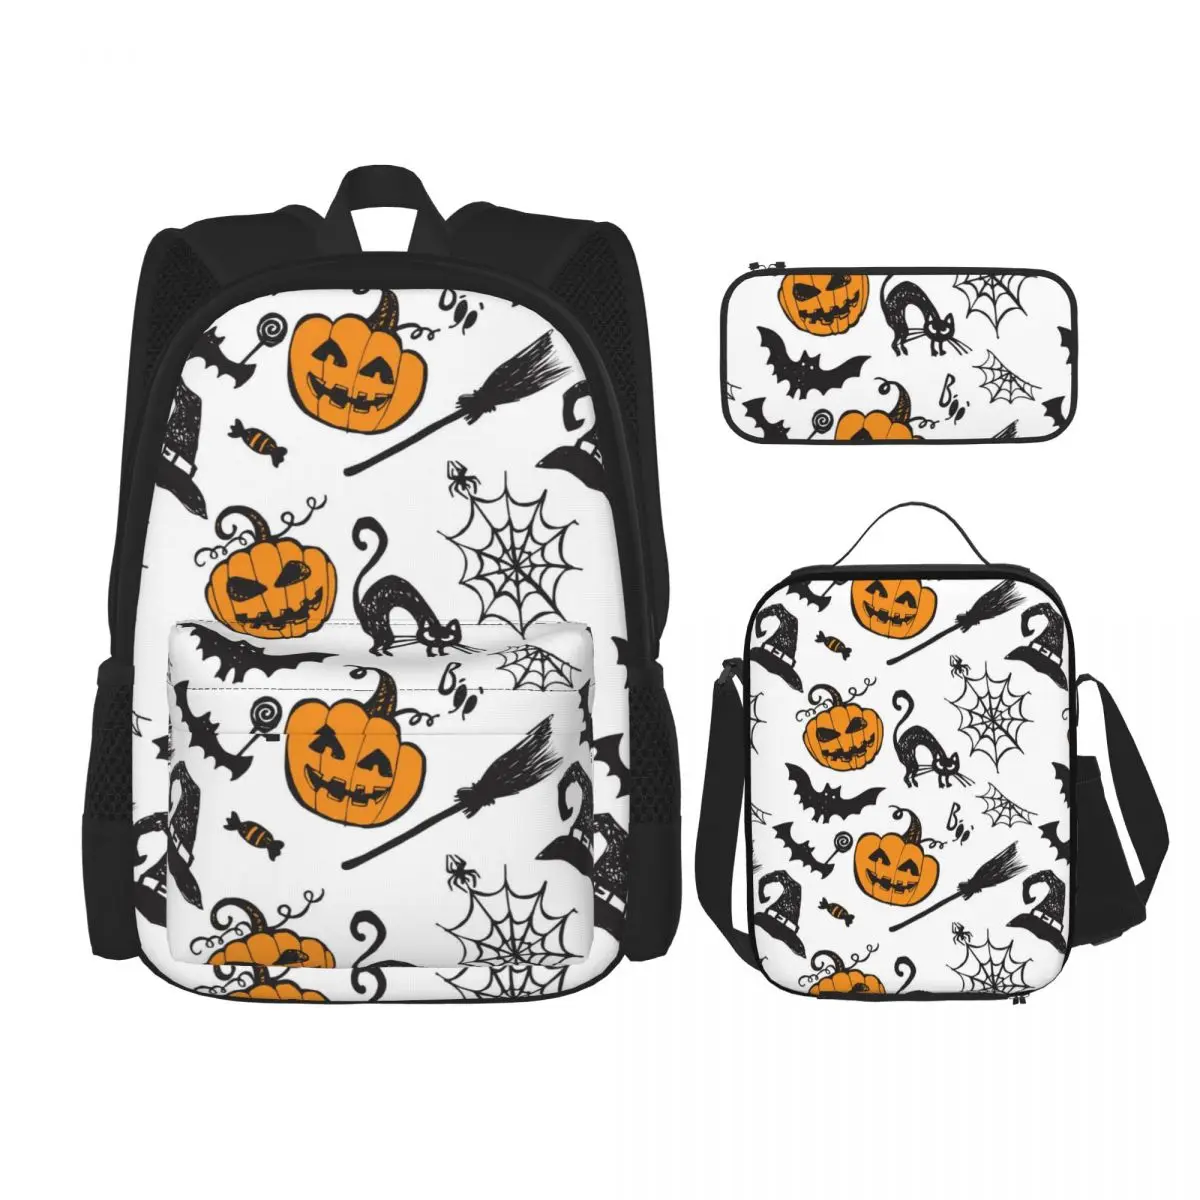 

3 Pcs Set Children's Backpacks School Bag for Girls Schoolbags Lunchbox School Child With Pencil Case Helloween Pattern